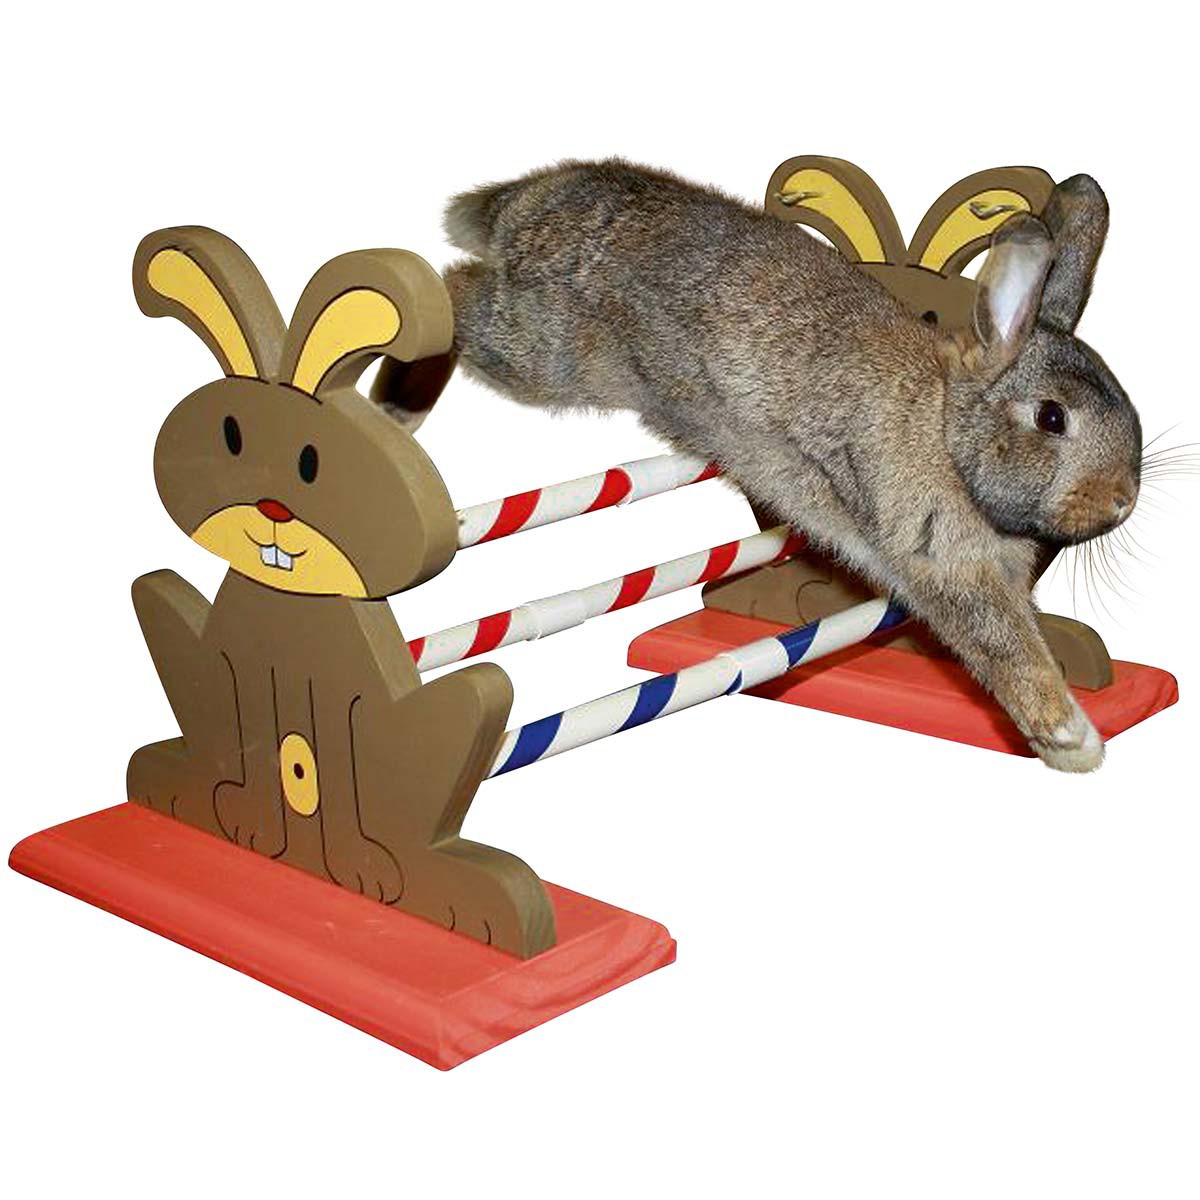 Agility Rodent Obstacles 62 x 33 x 34 cm